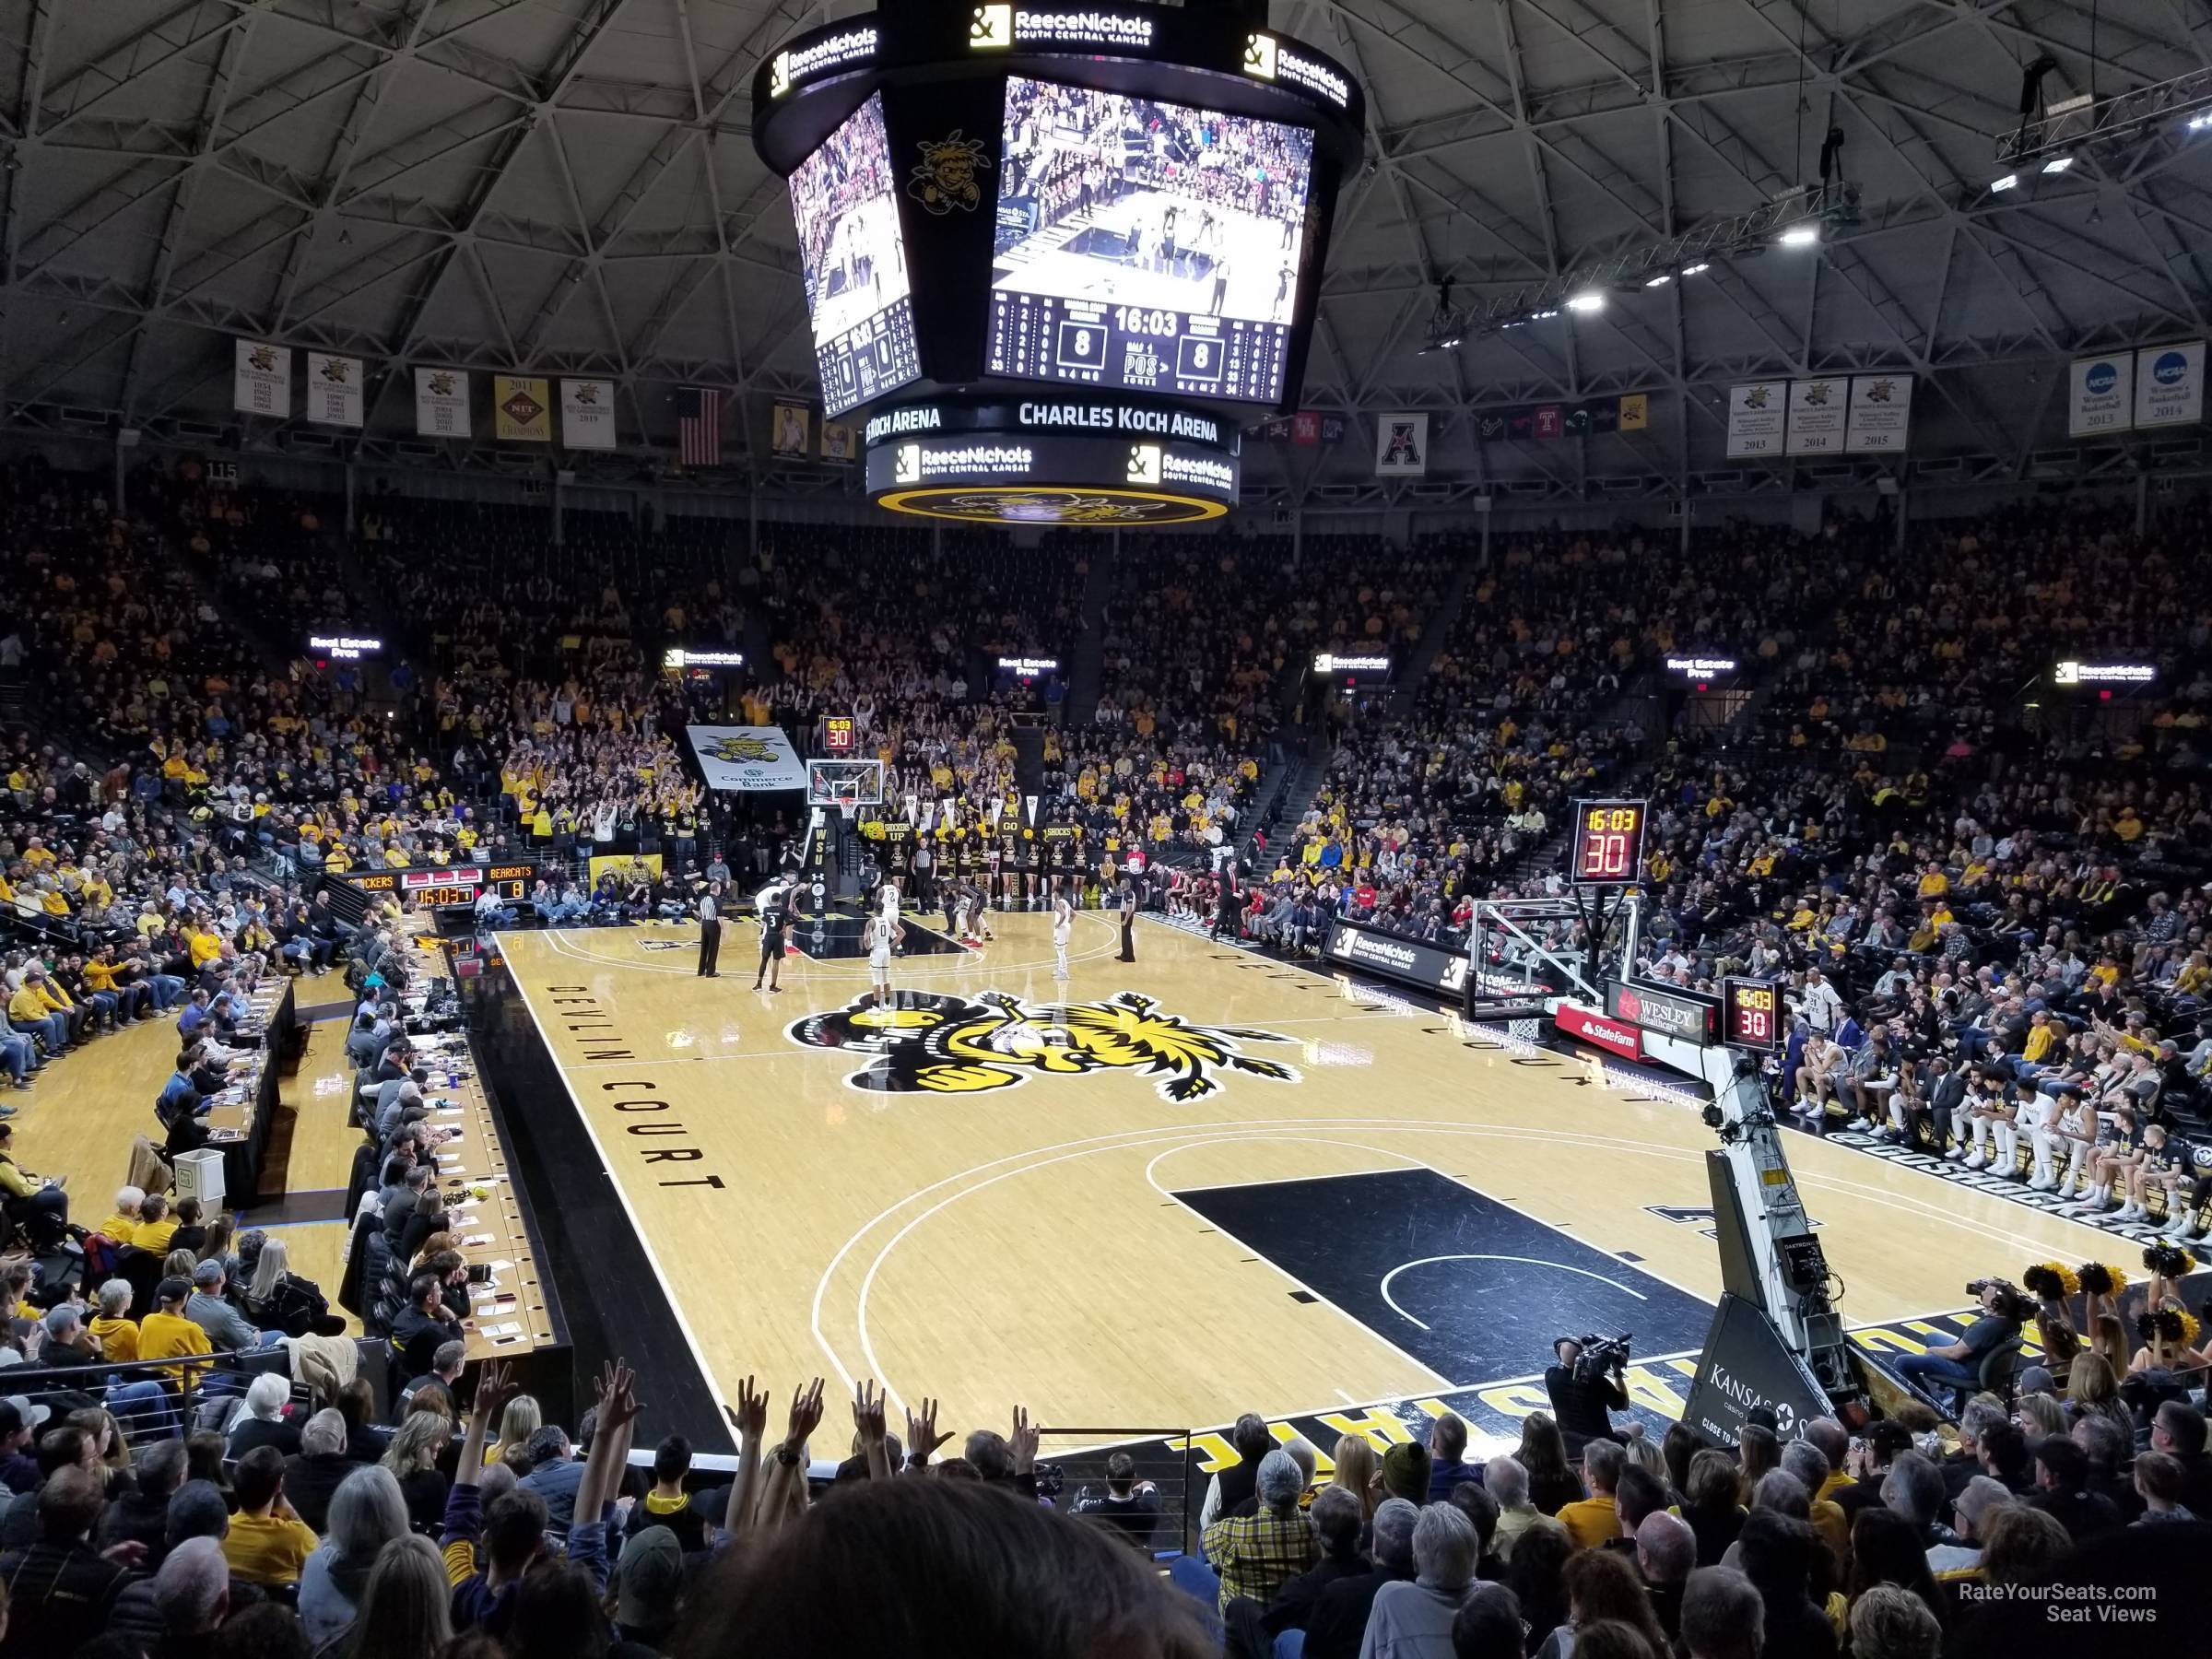 section 126, row 16 seat view  - charles koch arena